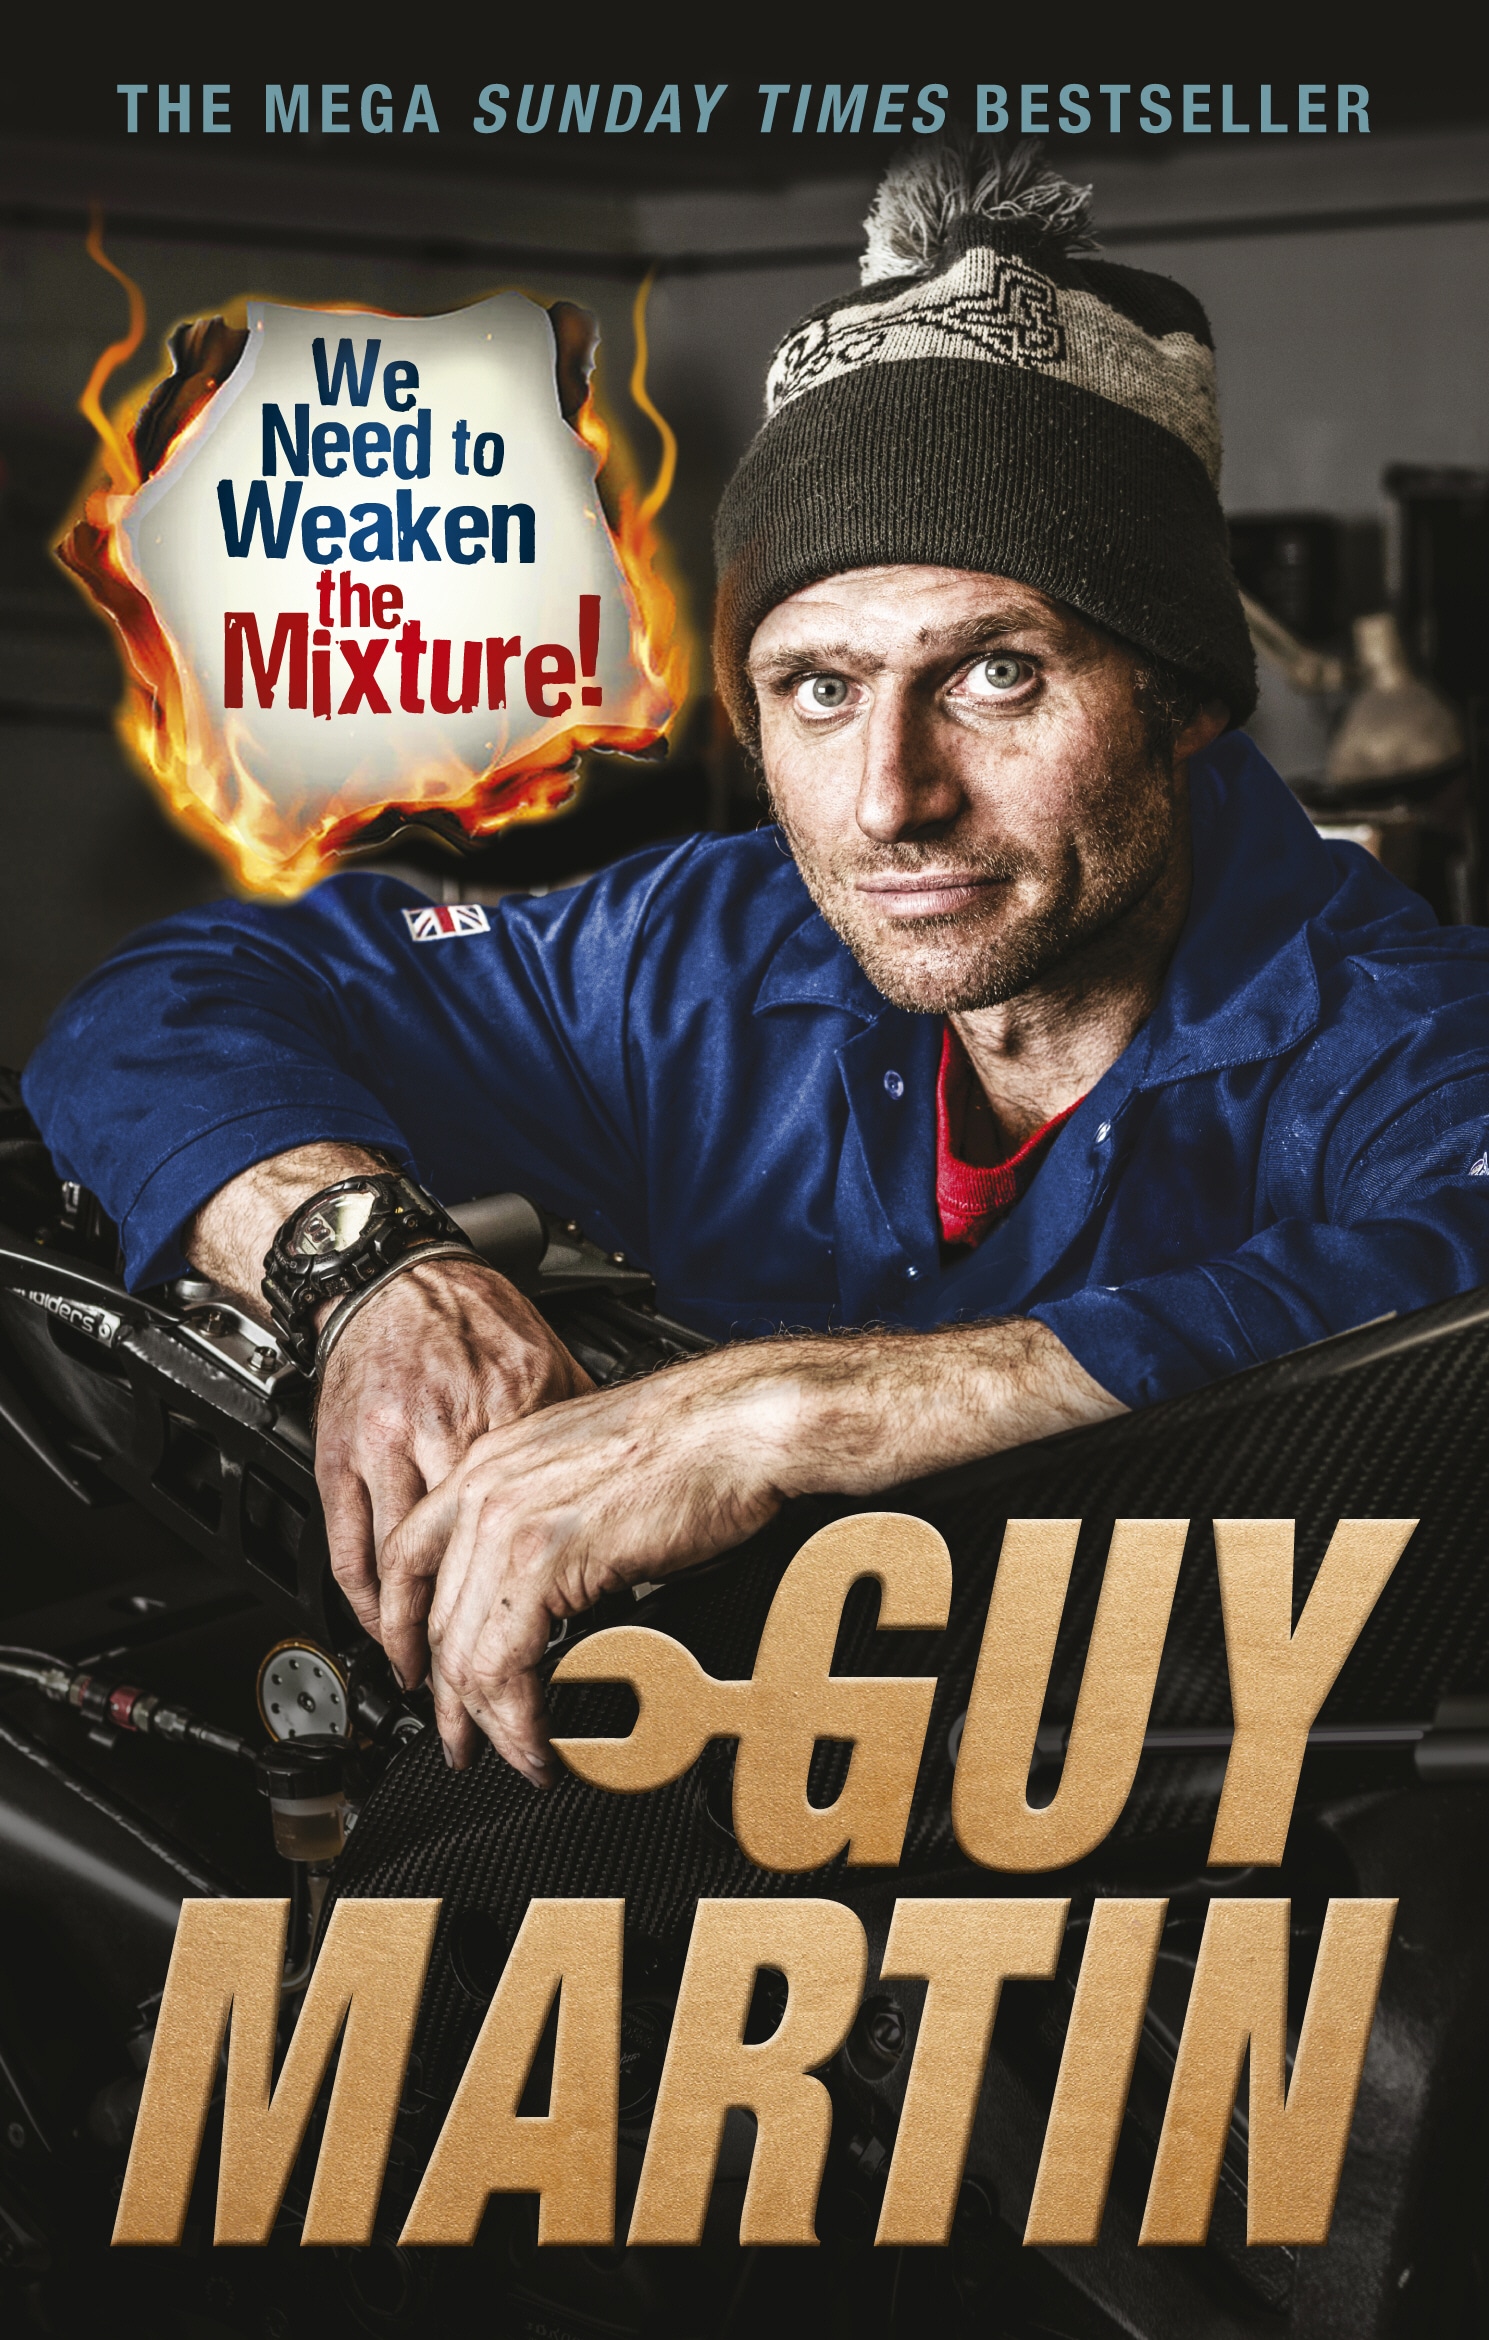 Book “We Need to Weaken the Mixture” by Guy Martin — May 16, 2019